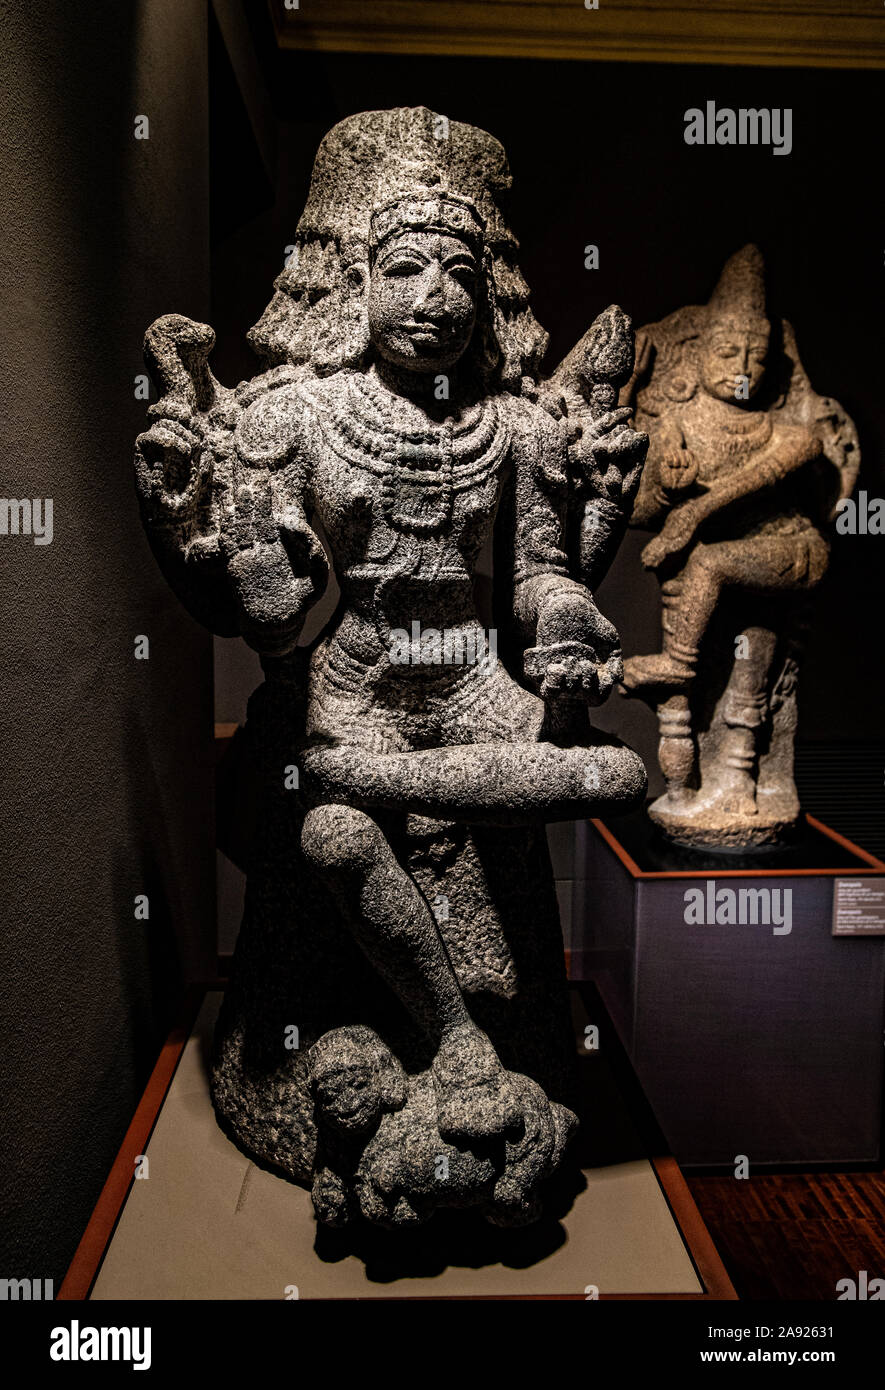 Italy Piedmont Turin - Mazzonis Palace - Mao Museum ( Museo d'Arte Orientale ) - Museum of Oriental art - Dakshinamurti - The God Shiva  as supreme teacher of Knowledge, arts and yoga. His Image faces South - Tamil Nadu 12th century A.D. Stock Photo